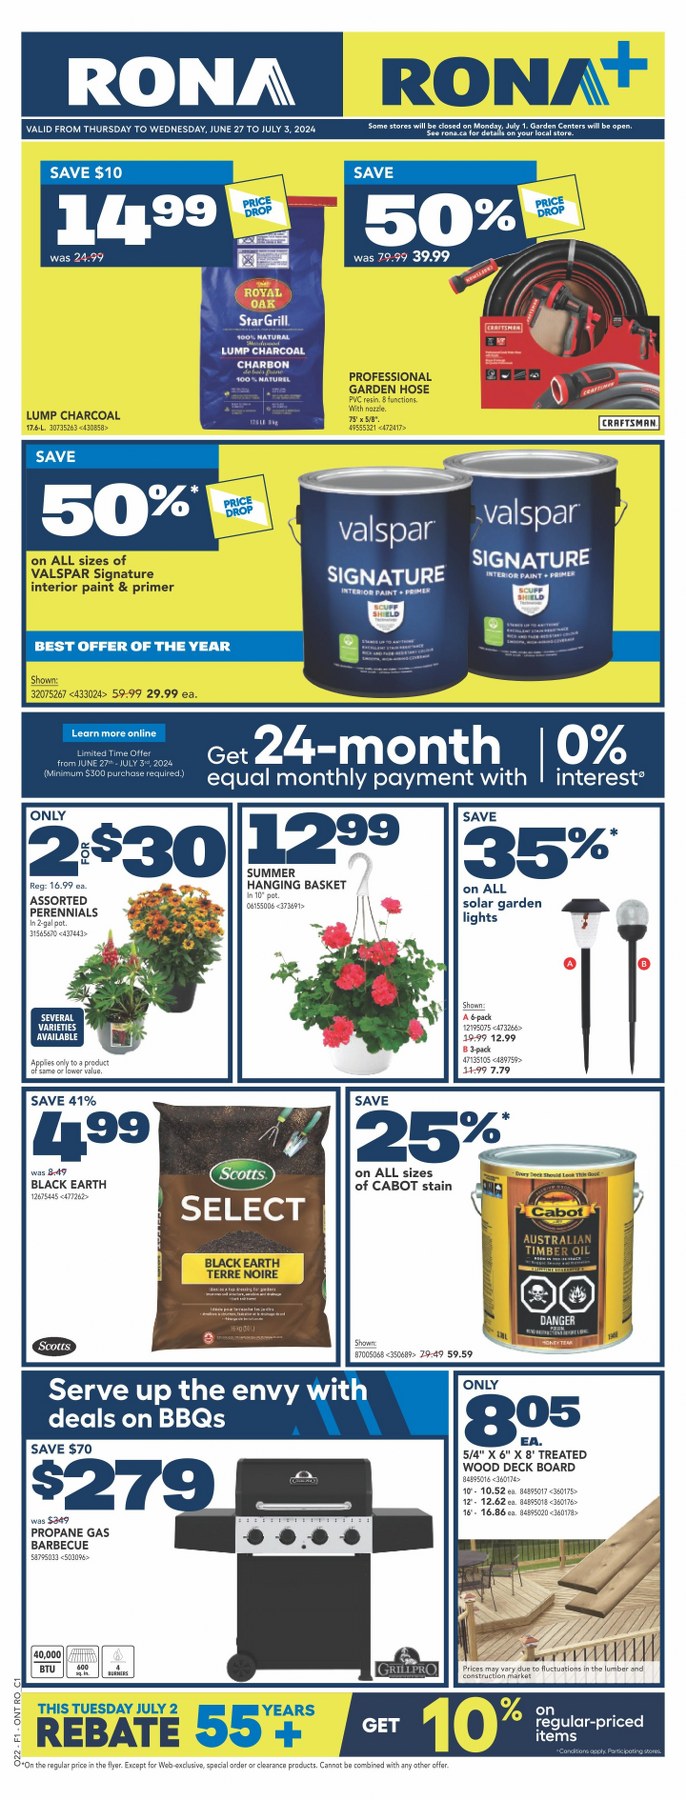 rona rona on flyer june 27 to july 3 1